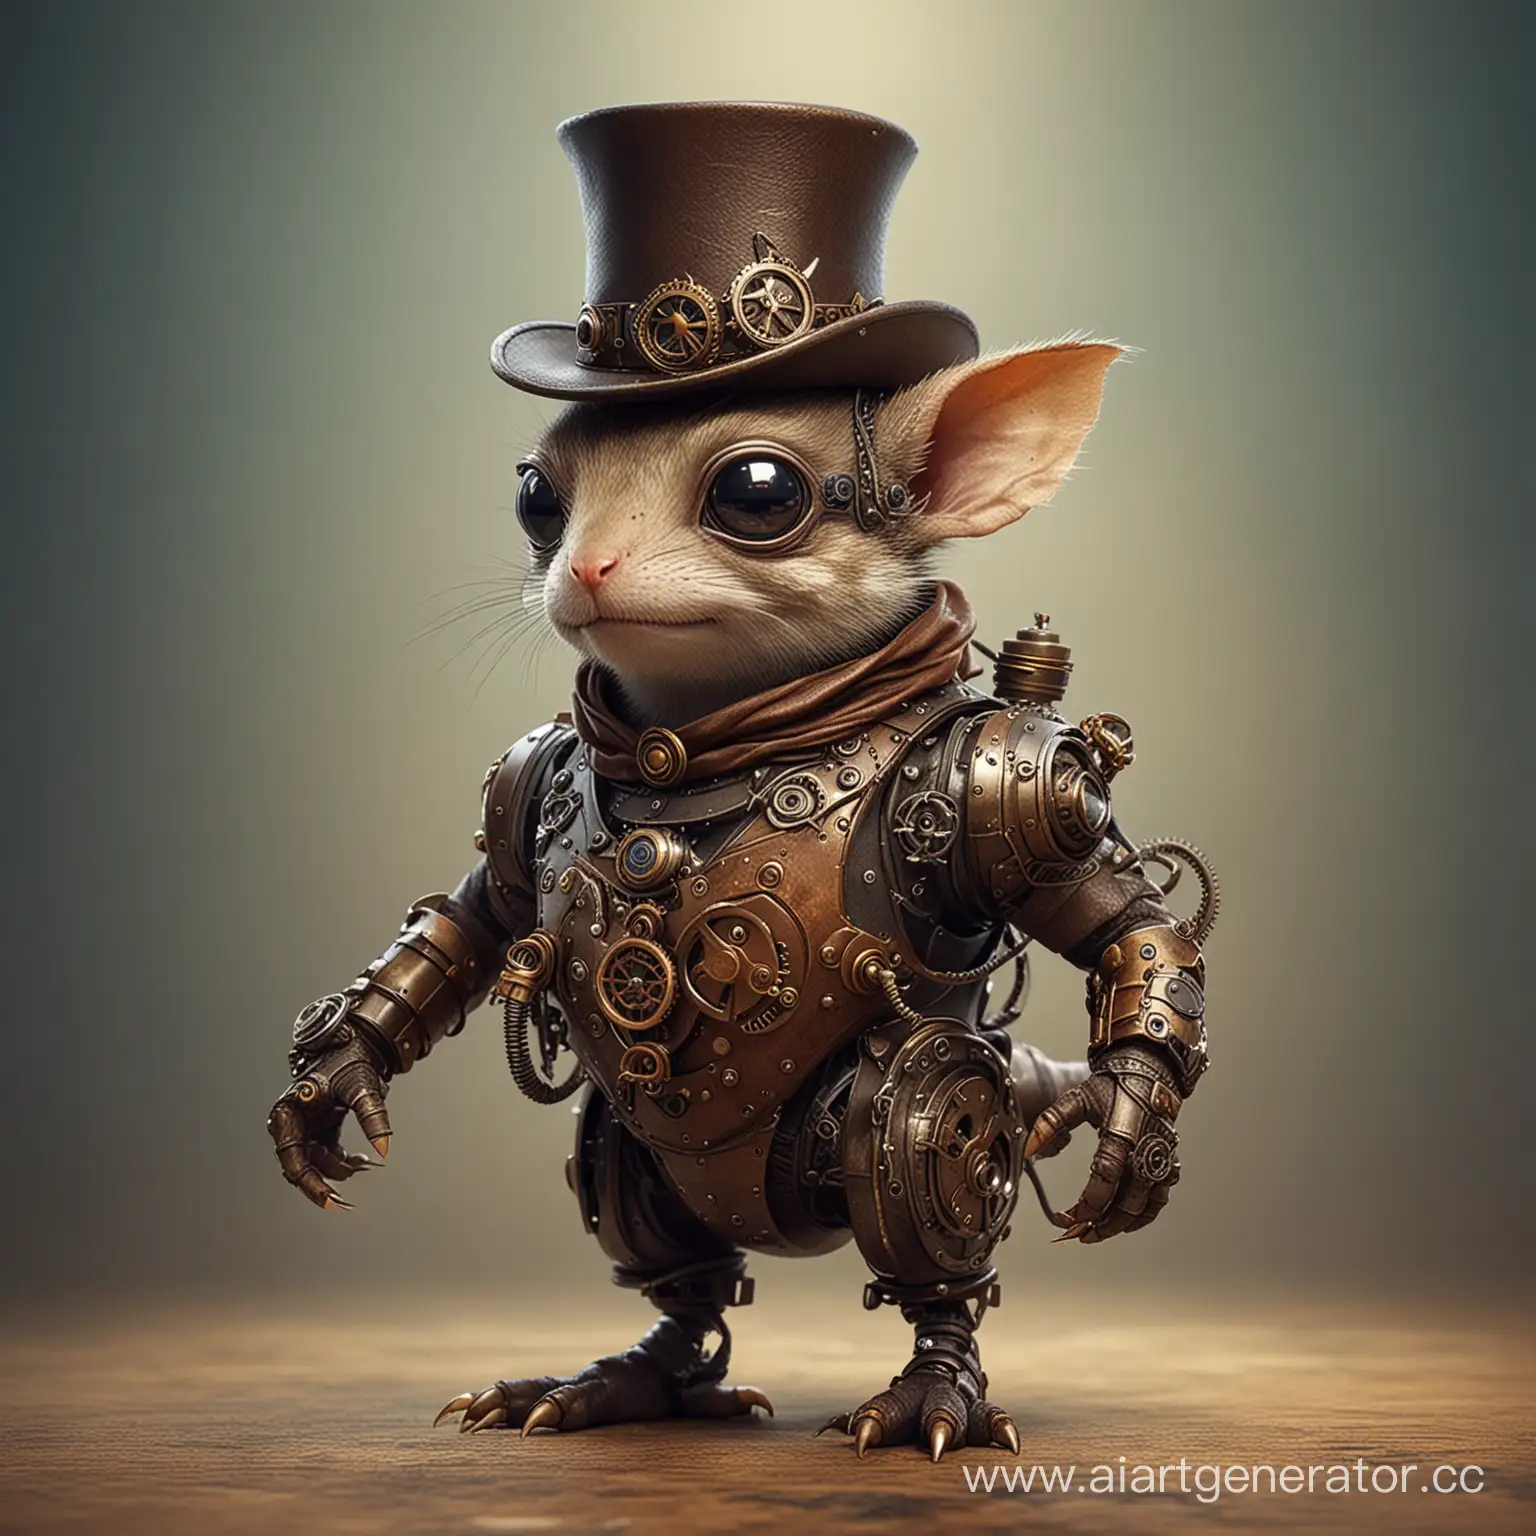 Whimsical-SteampunkInspired-Little-Creature